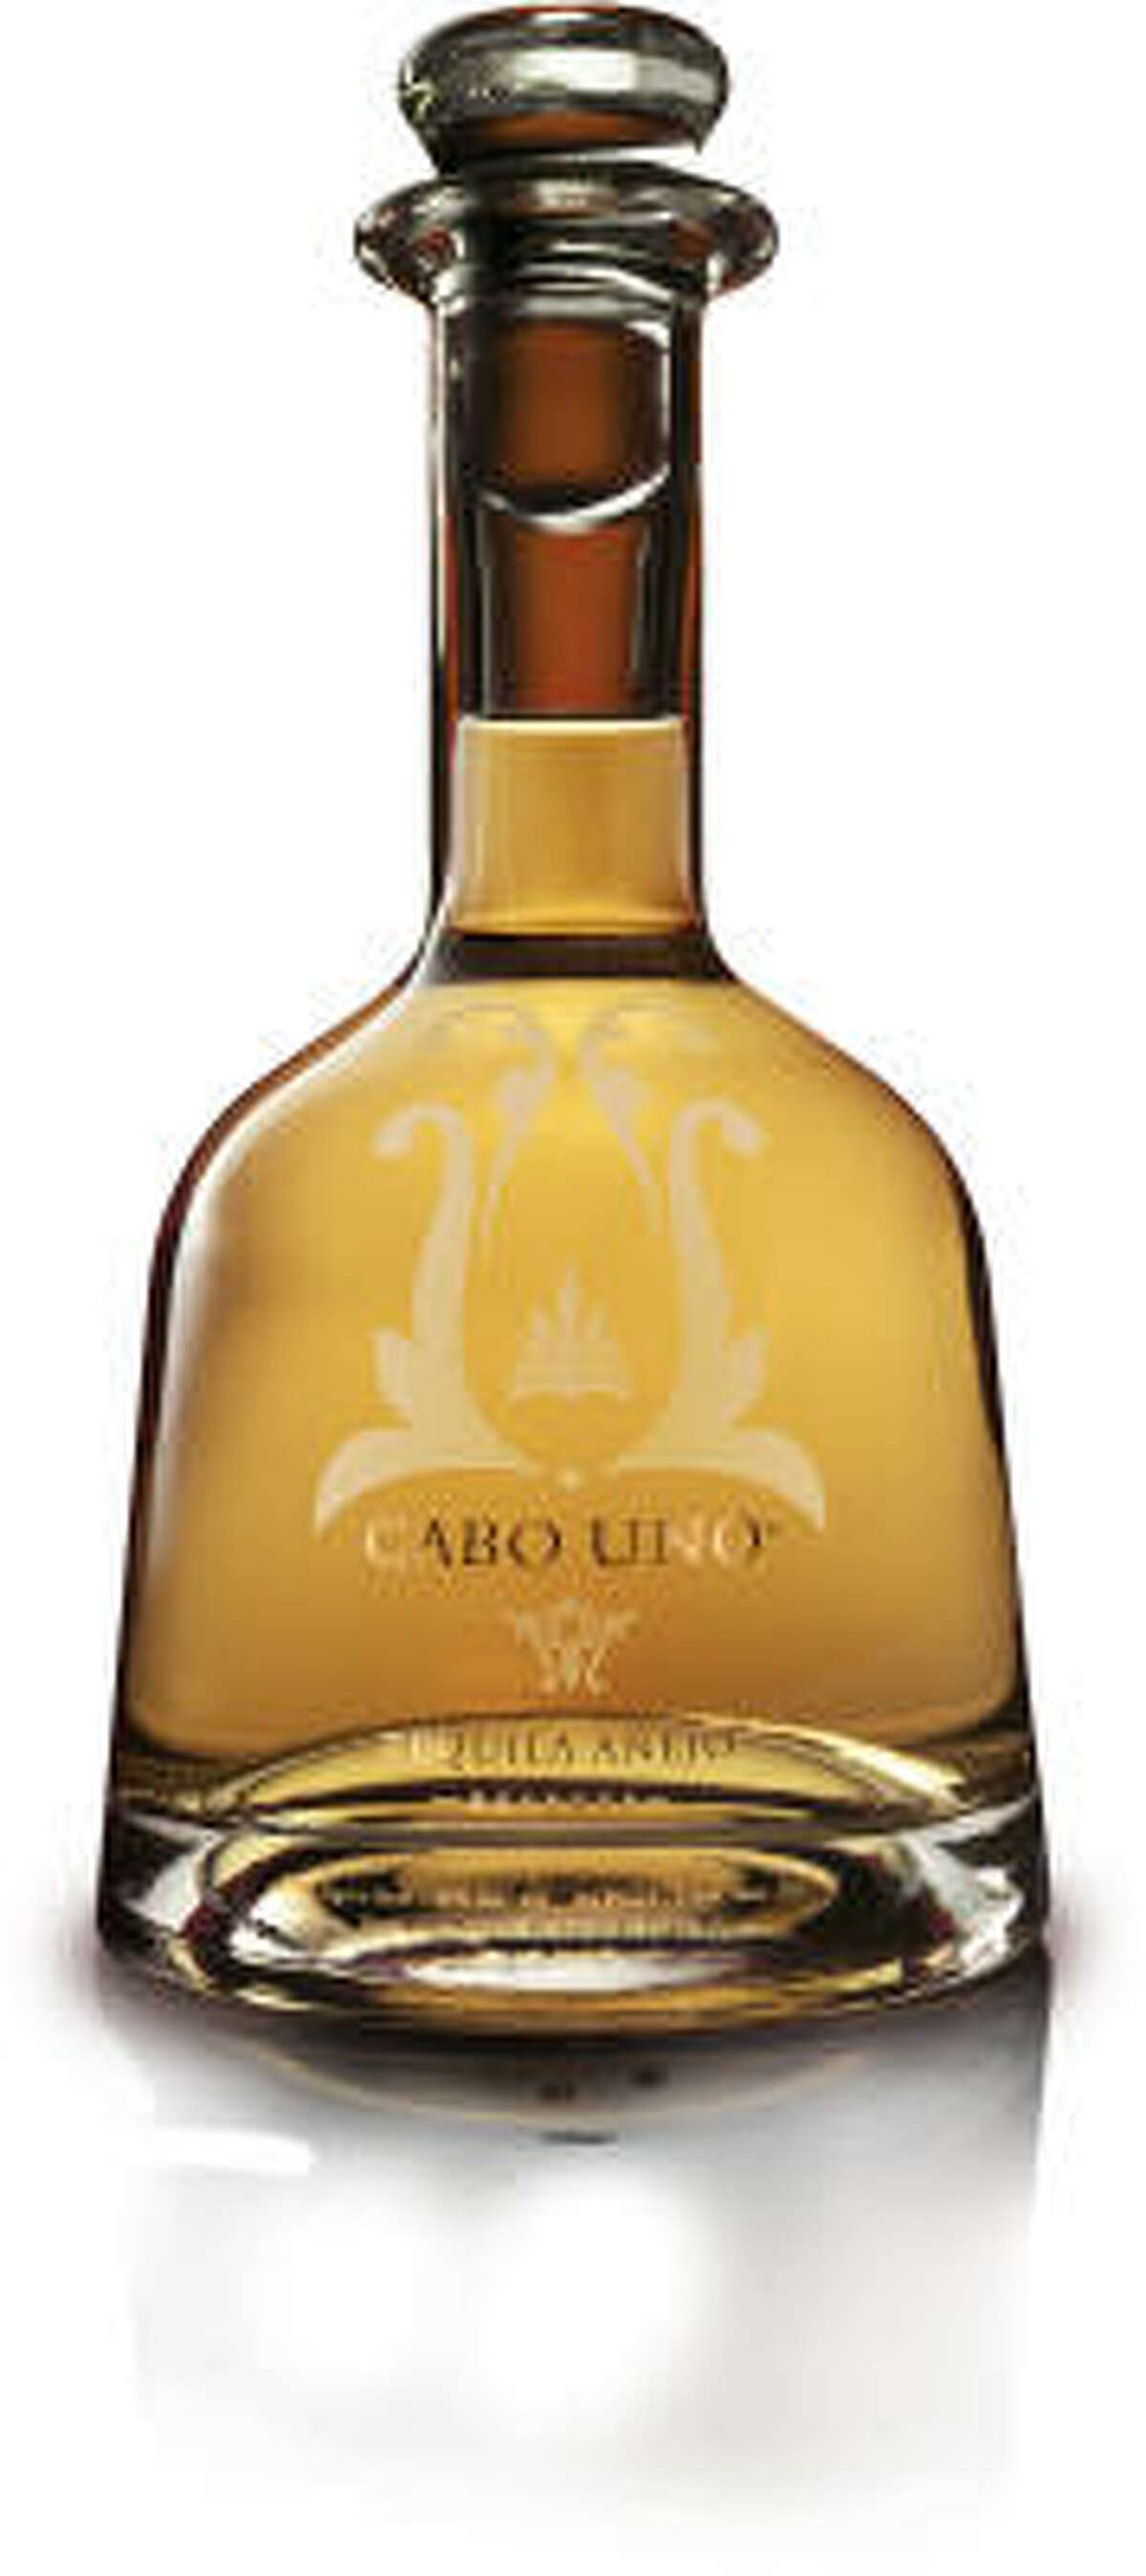 Cabo Uno Tequila: Cabo Wabo Tequila calls itself the original rock ’n’ roll tequila, but its most upscale bottling would have to be considered a symphony. Made from 100 percent blue agave, Uno is aged in American oak barrels for 38 months and housed in a lead-free crystal decanter. For tequila enthusiasts, Sammy Hagar’s beloved brand sports flavors of chocolate, caramel and roasted coffee; $250.